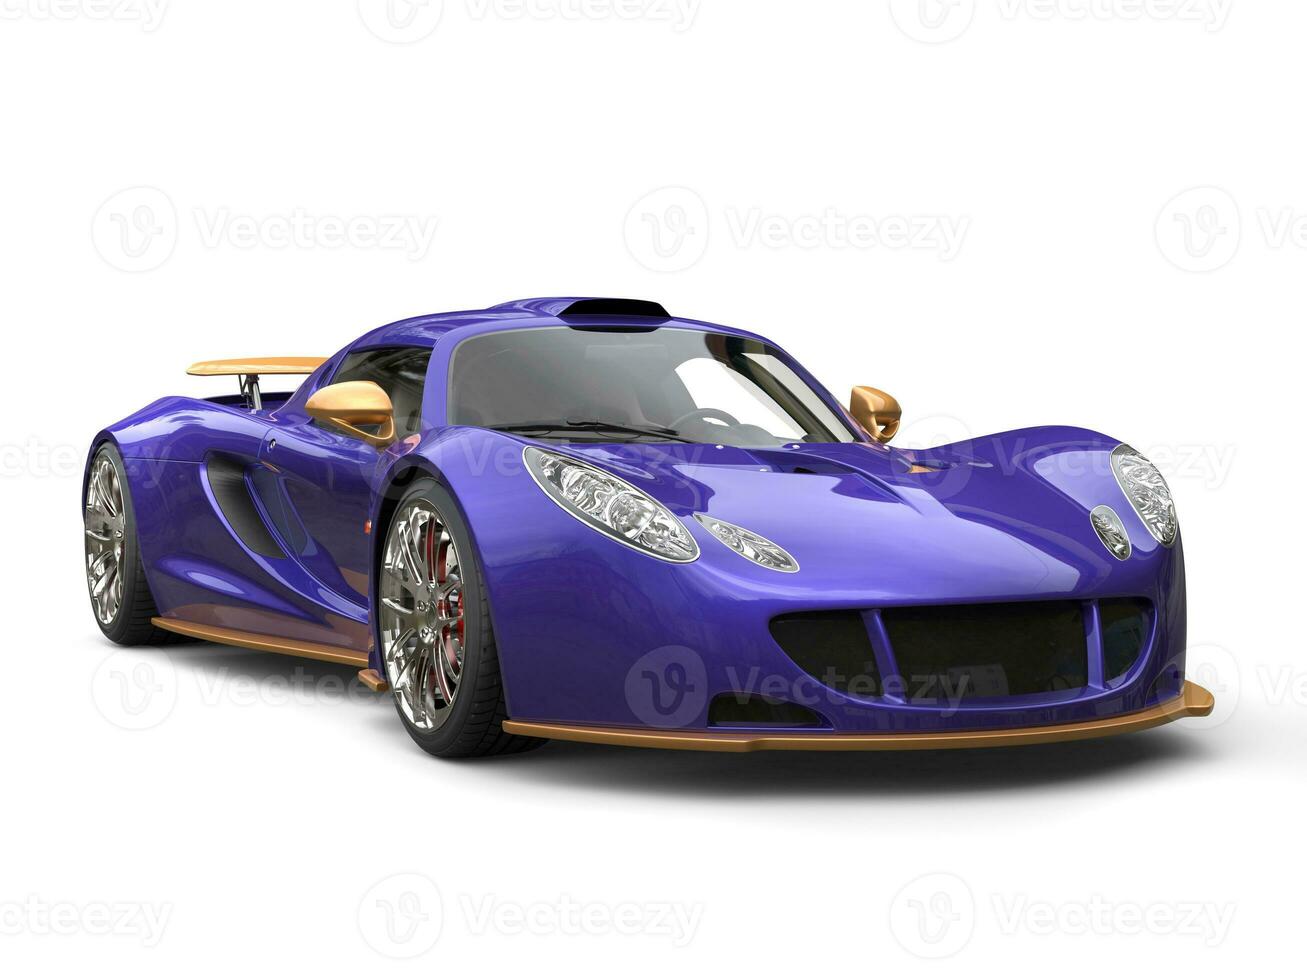 Gold and purple awesome supercar photo